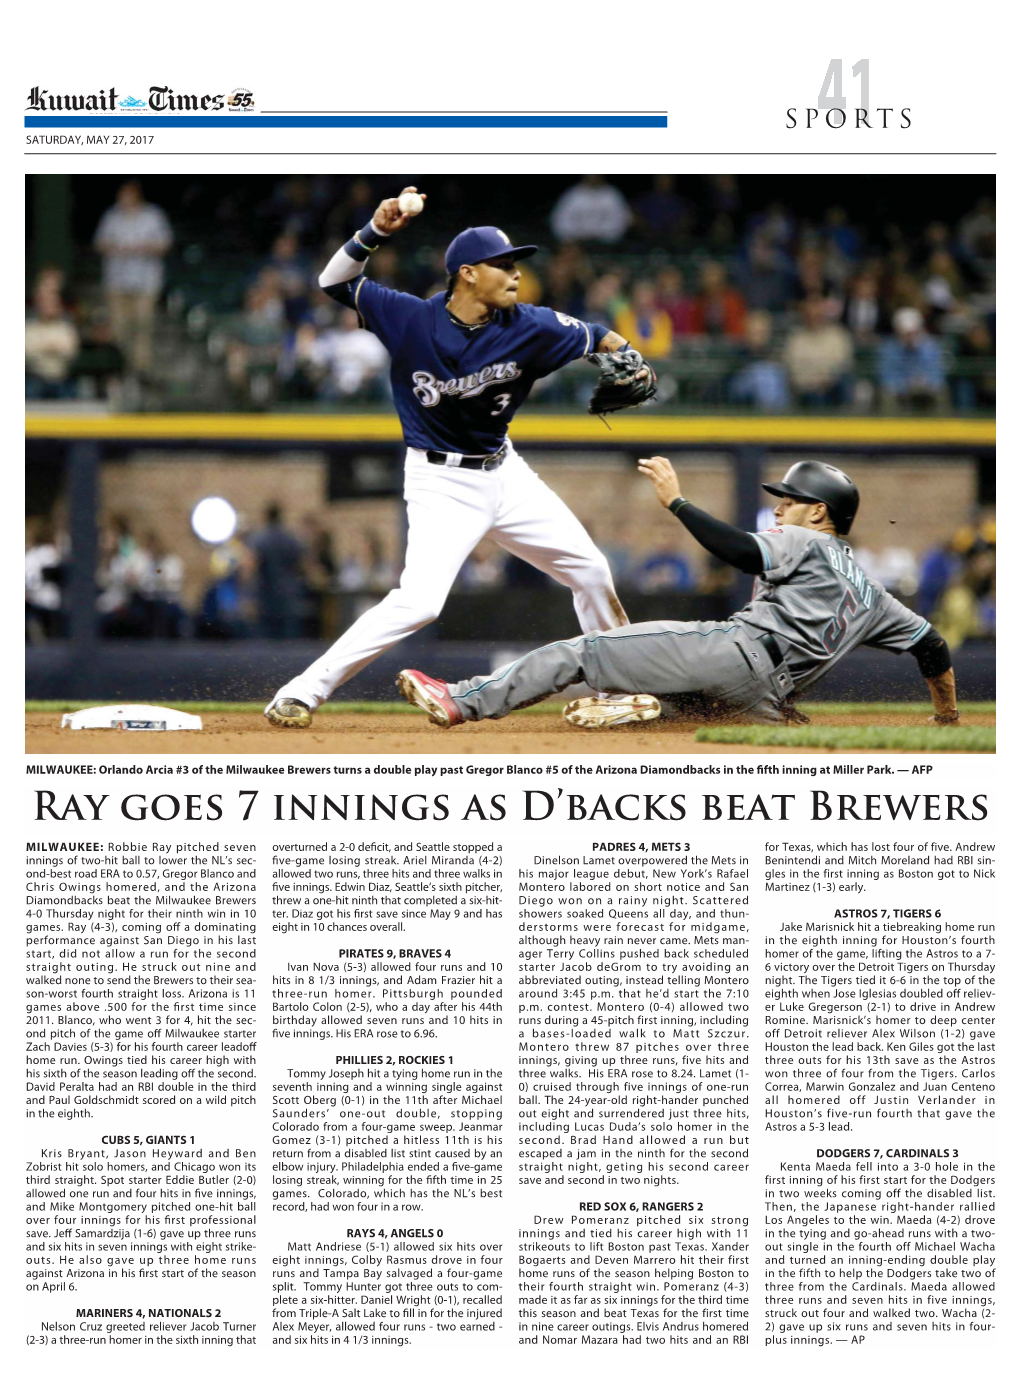 Ray GOES 7 Innings AS D'backs Beat Brewers